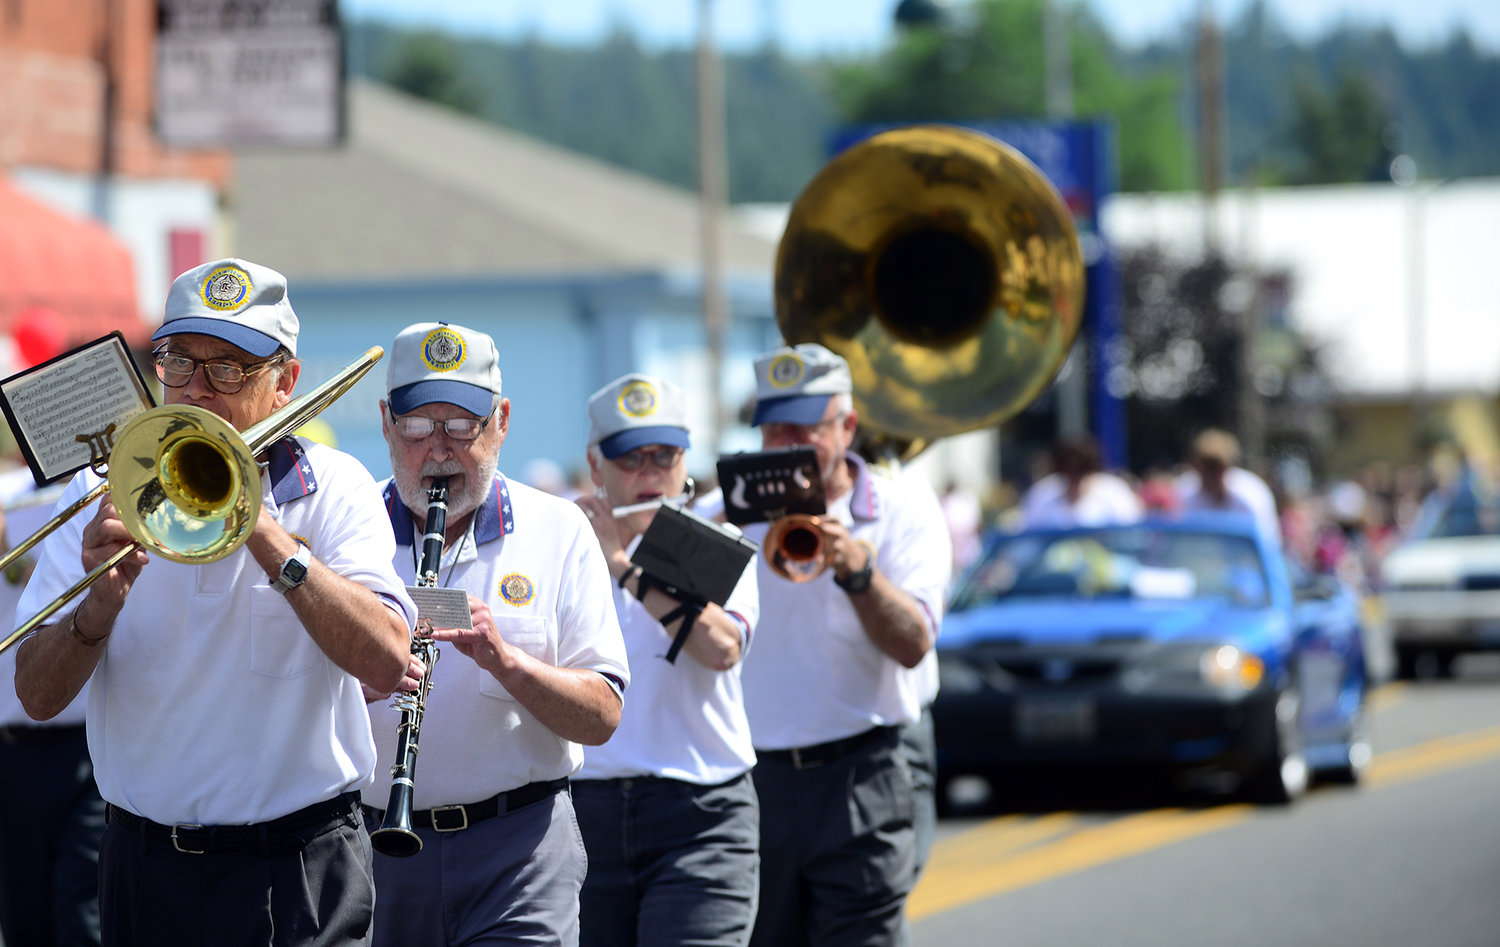 The Department of Washington American Legion Band plays during the Oregon Trail Days Parade in downtown Tenino in this file photo.